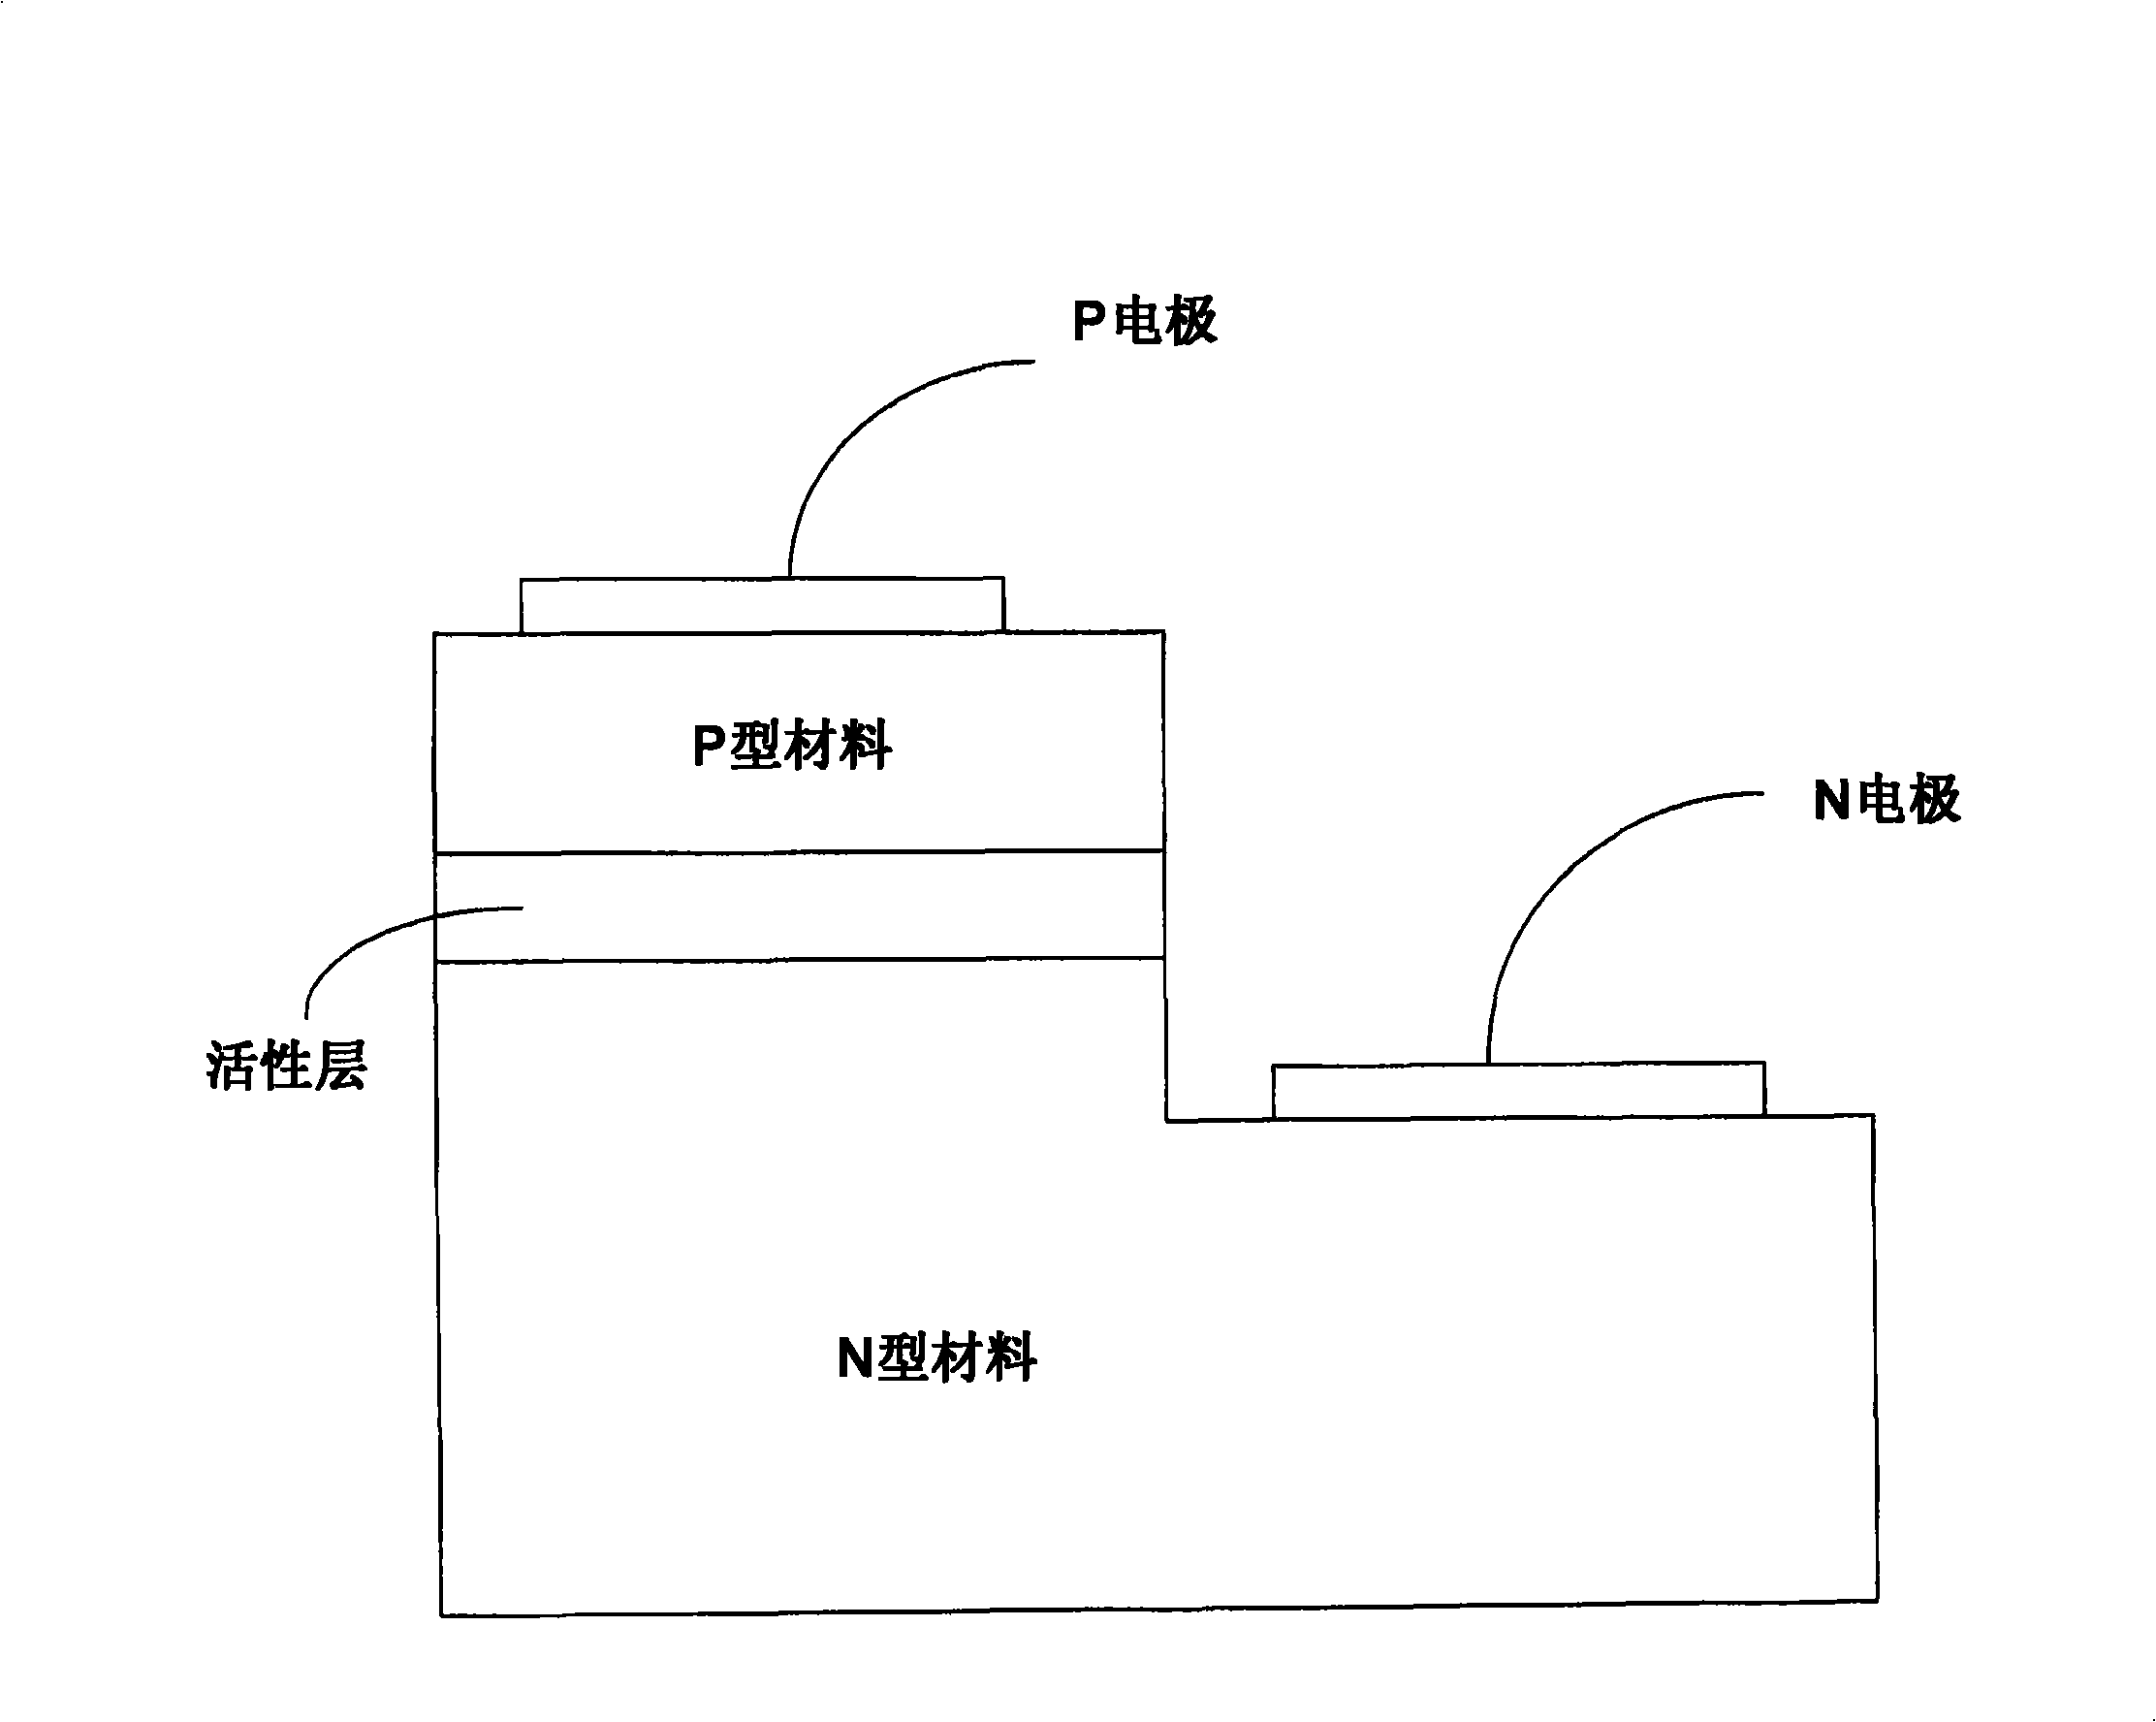 LED chip capable of improving light-discharging rate and preparation technique thereof